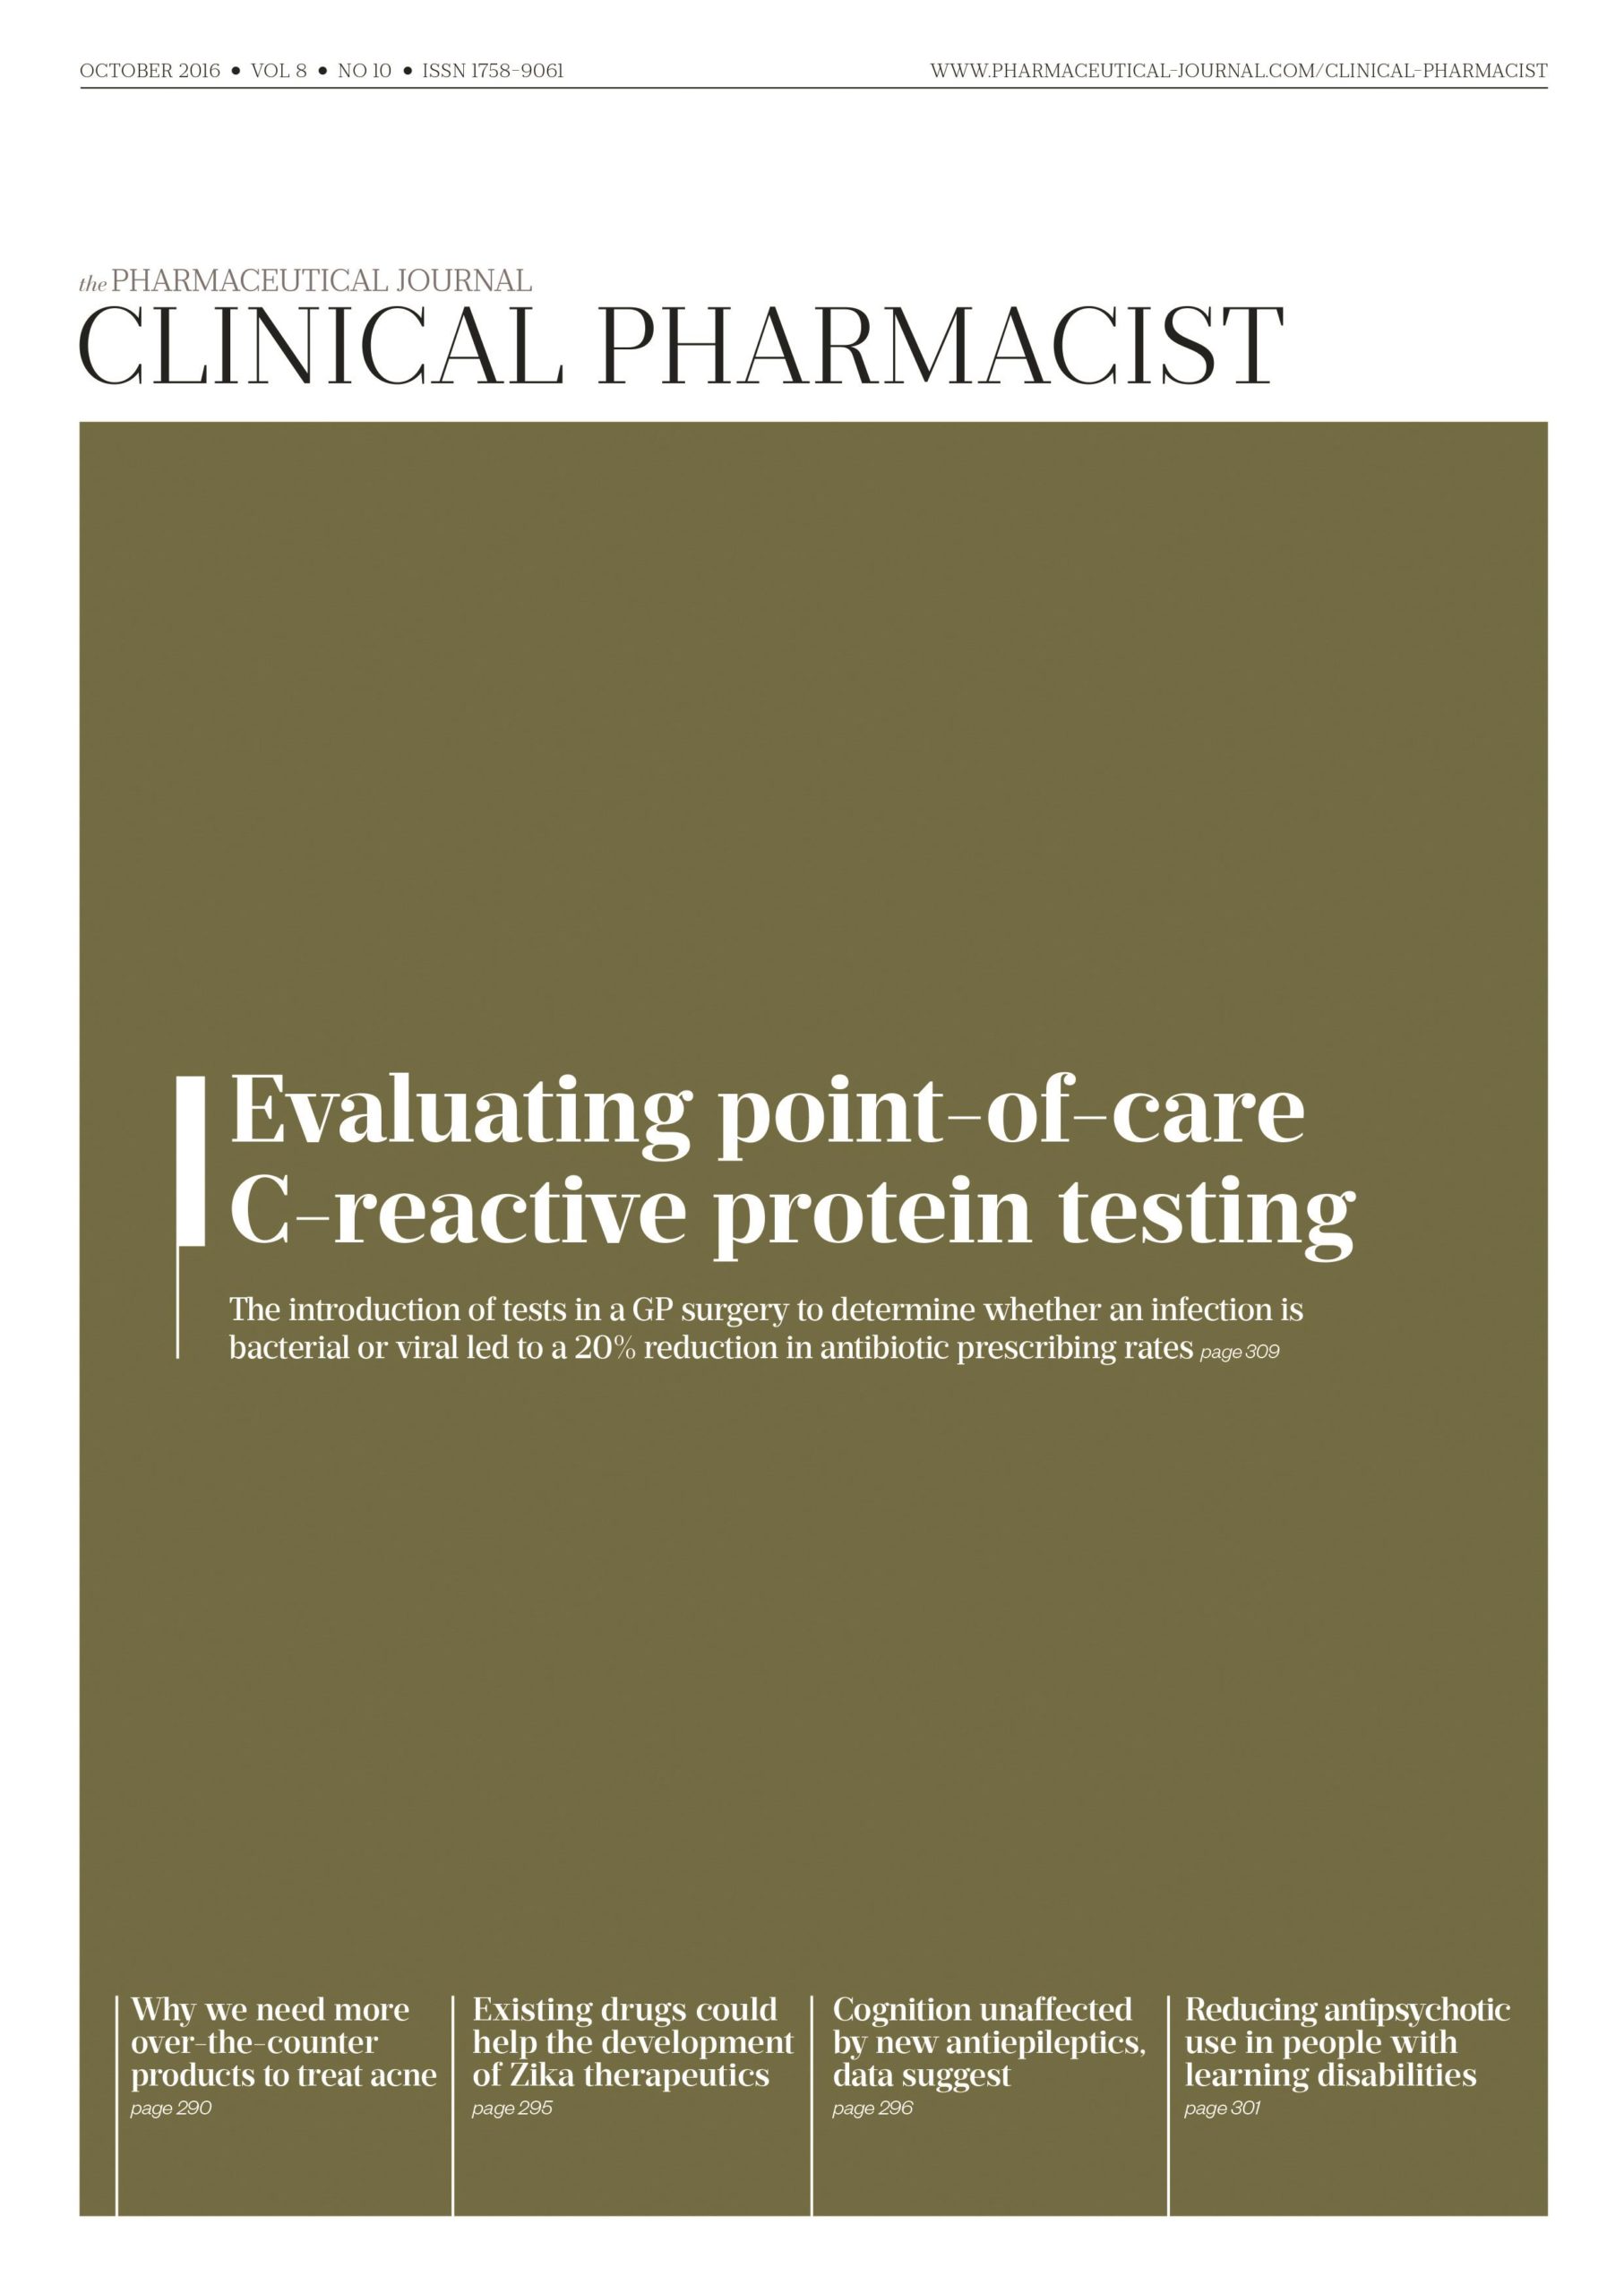 Publication issue cover for CP, October 2016, Vol 8, No 10